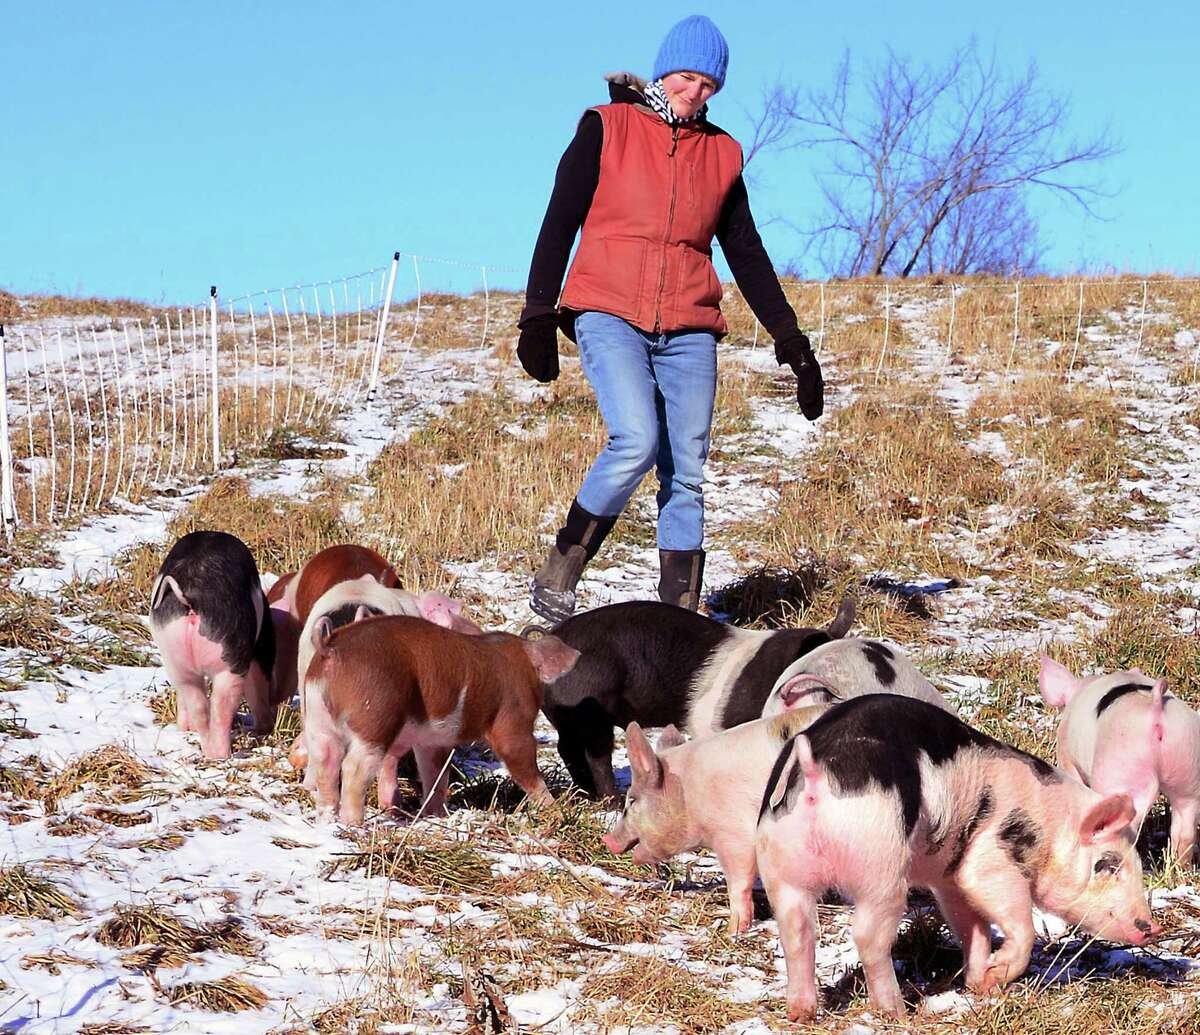 Annie Metzger with some of her pastured pigs on her Laughing Earth Farm Thursday Dec. 14, 2017 in Cropseyville, NY. (John Carl D'Annibale / Times Union)